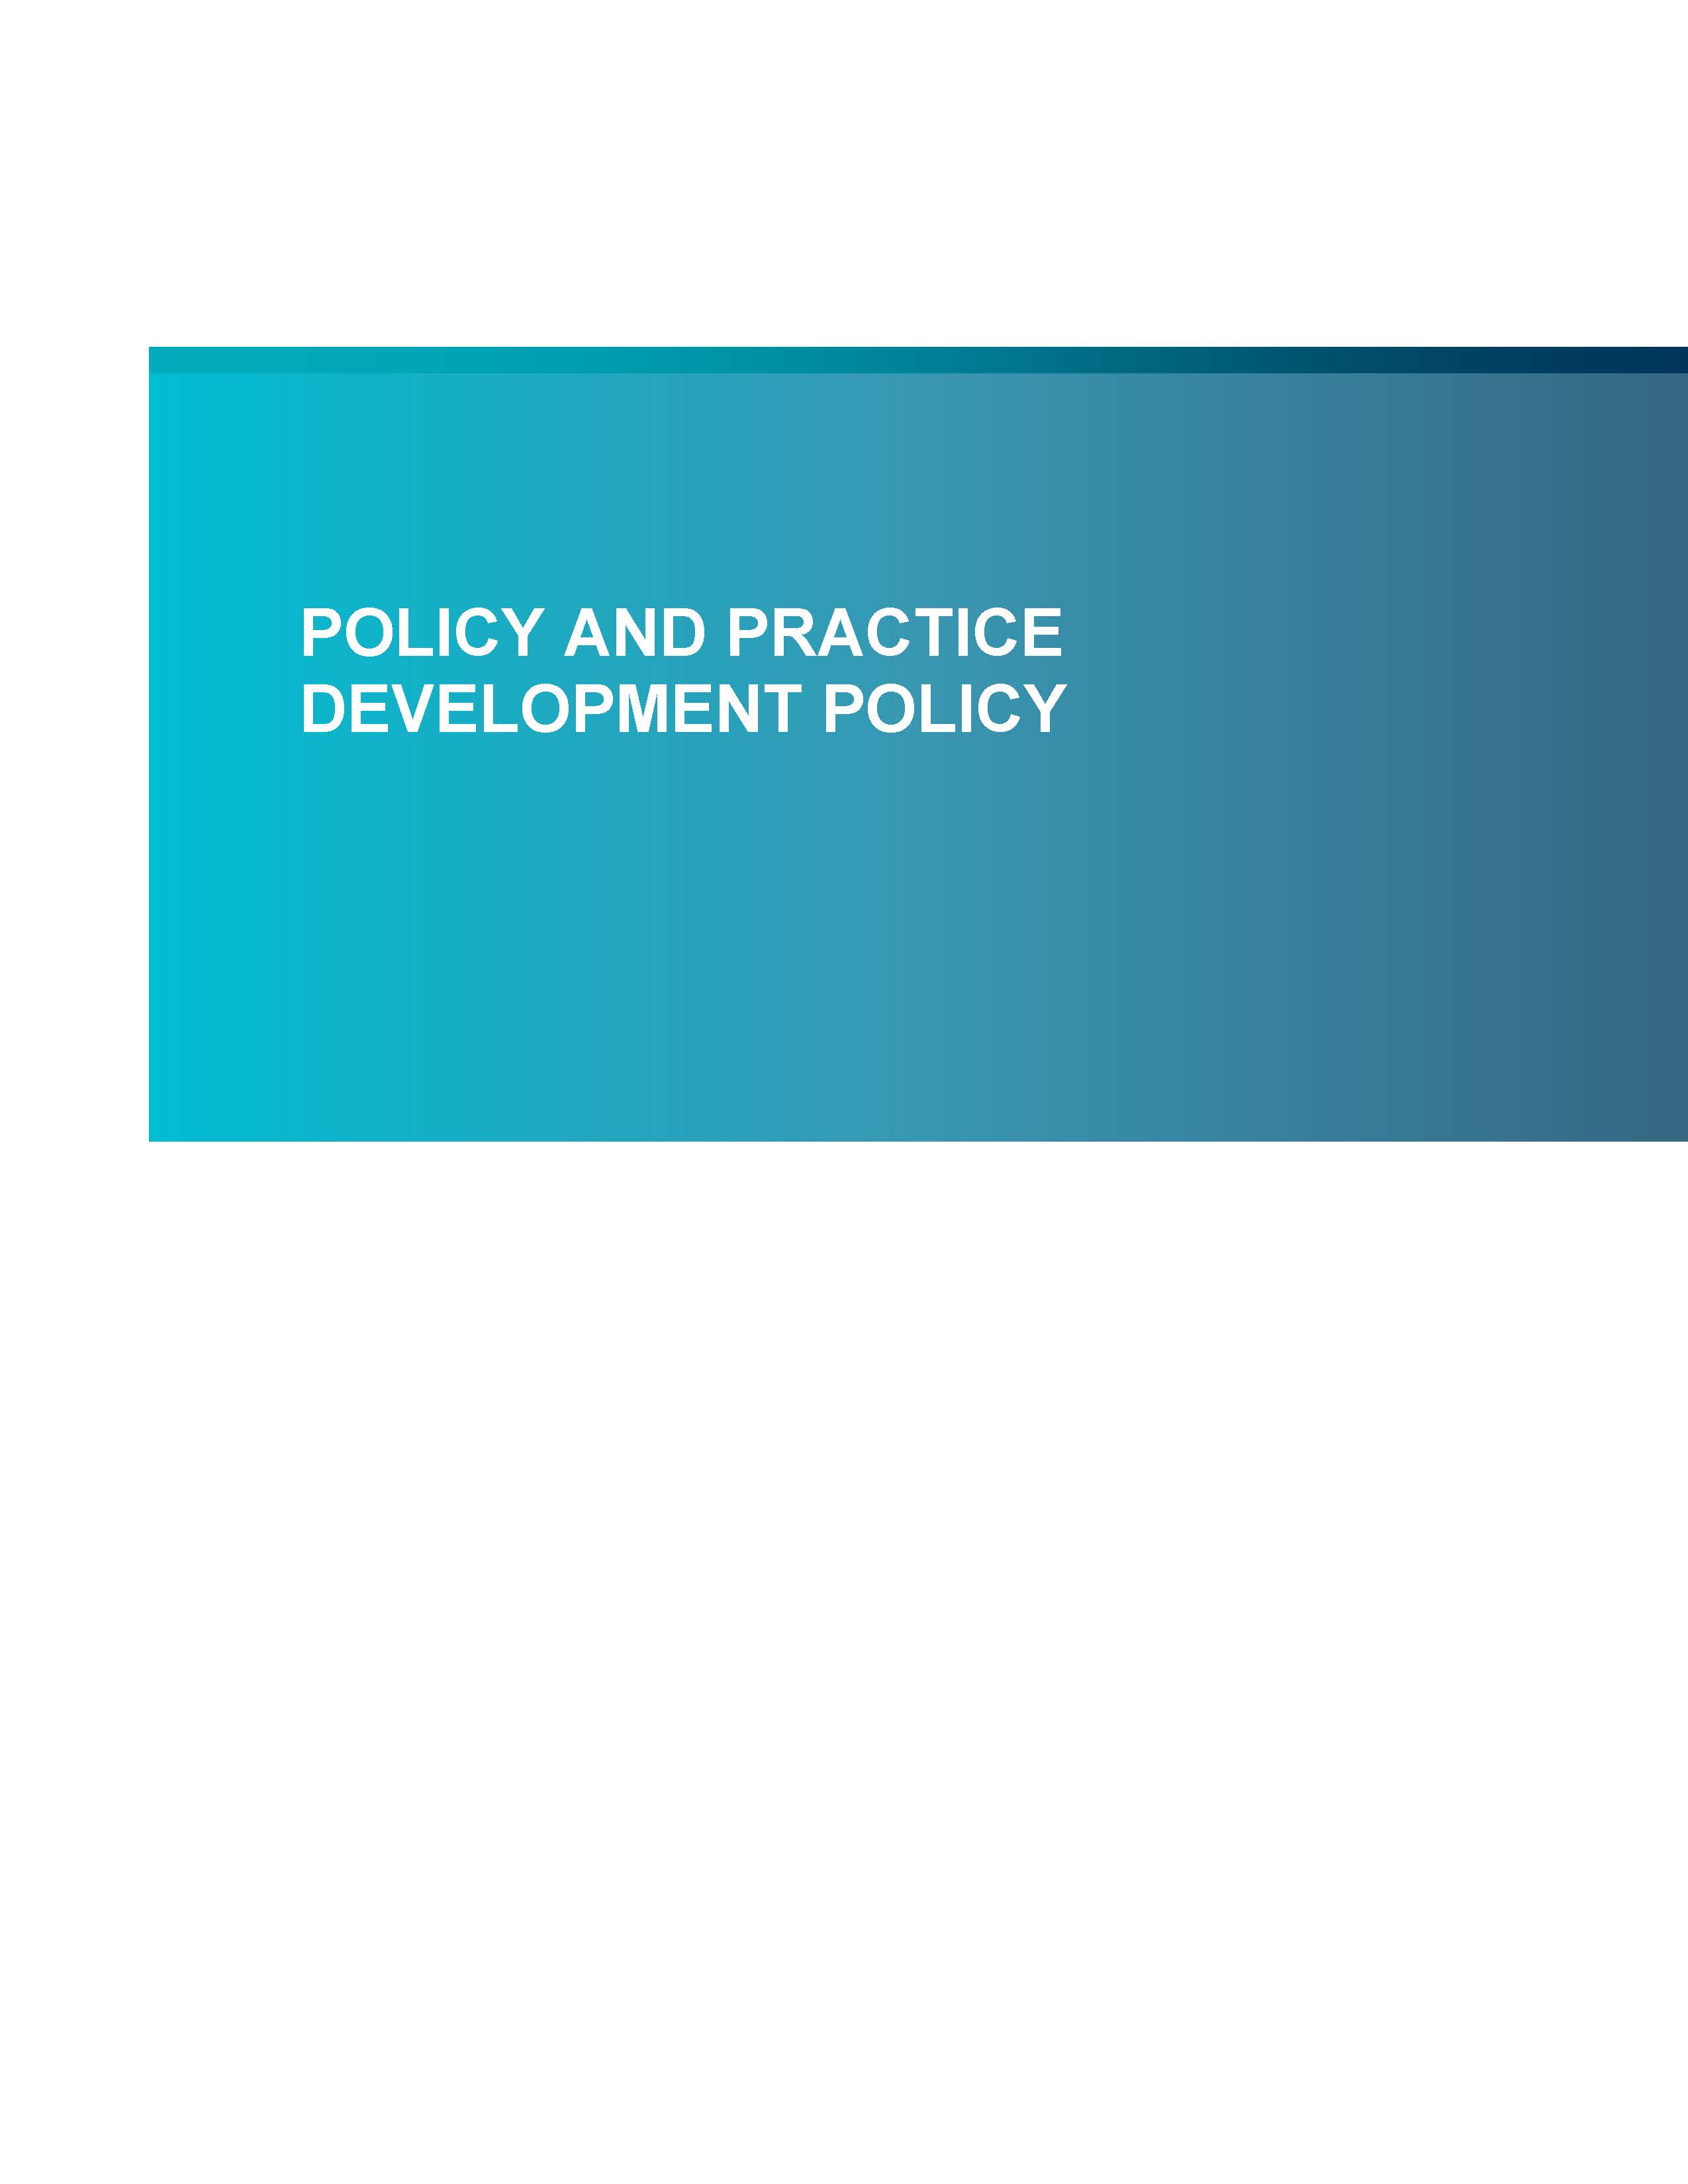 Screenshot of the first page of Policy and Practice Development Policy